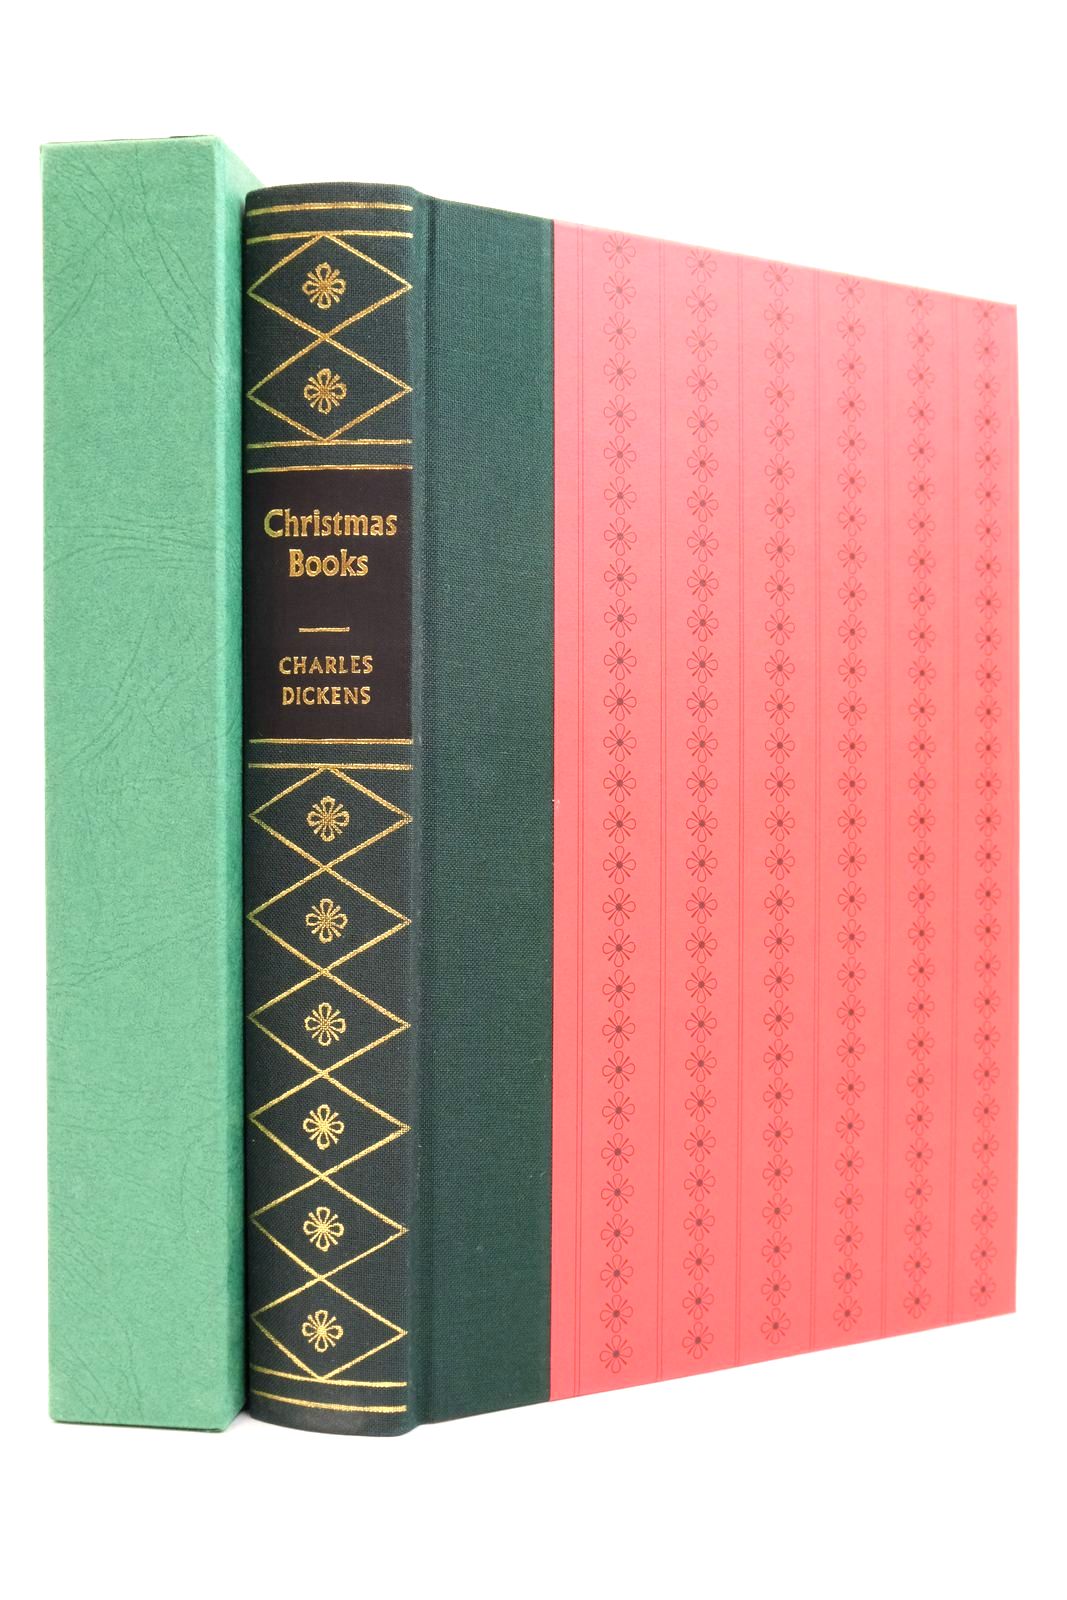 Photo of CHRISTMAS BOOKS written by Dickens, Charles illustrated by Keeping, Charles published by Folio Society (STOCK CODE: 2138517)  for sale by Stella & Rose's Books